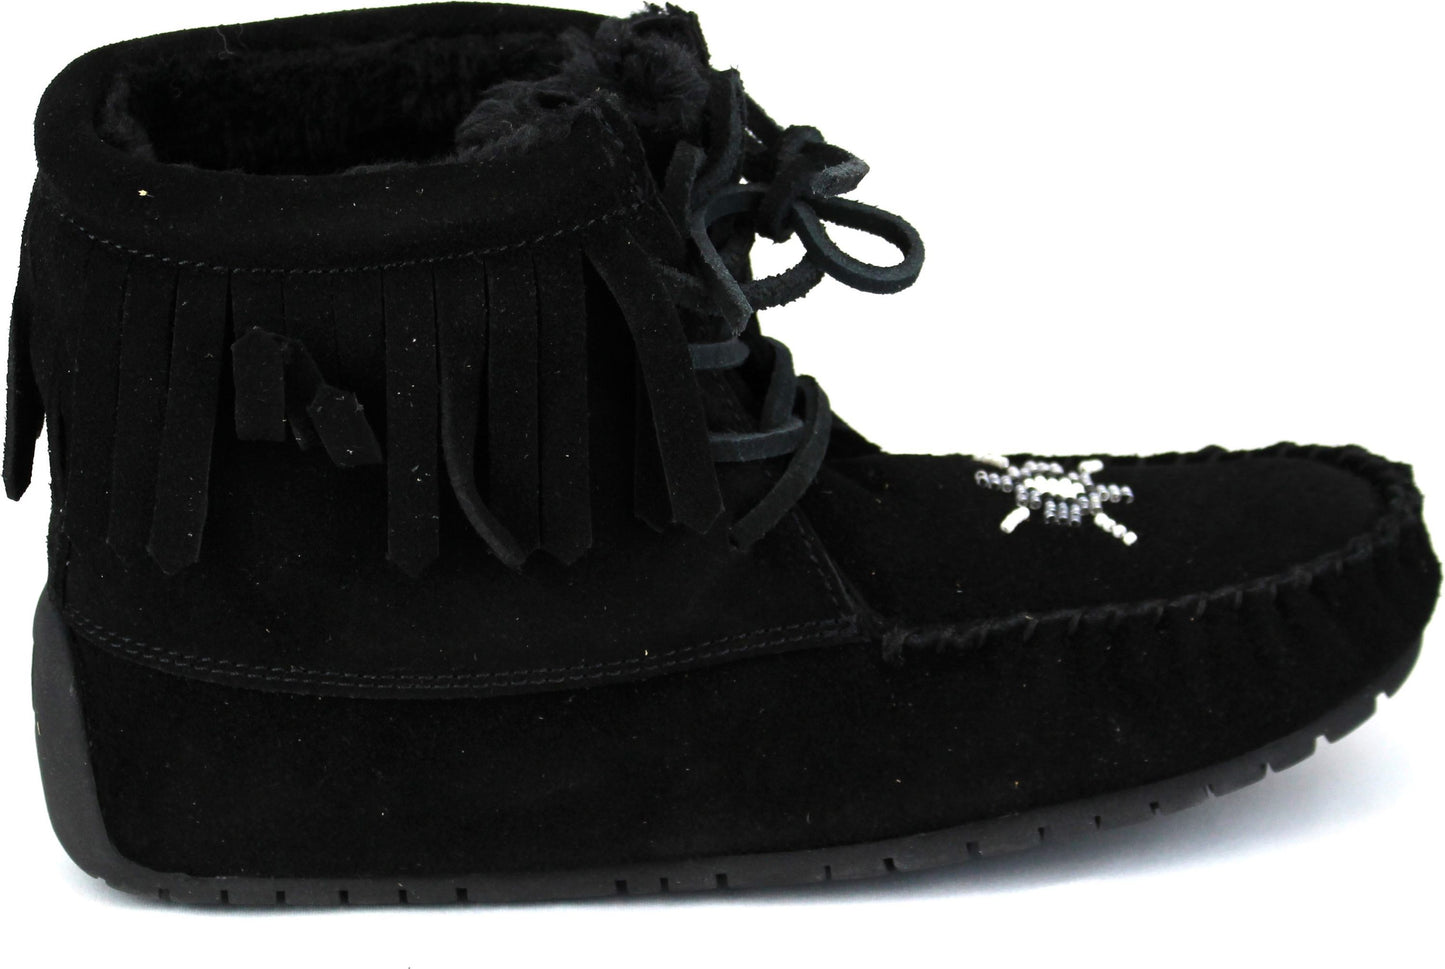 Urban Trail Boots Short Laceup Black Suede Boot